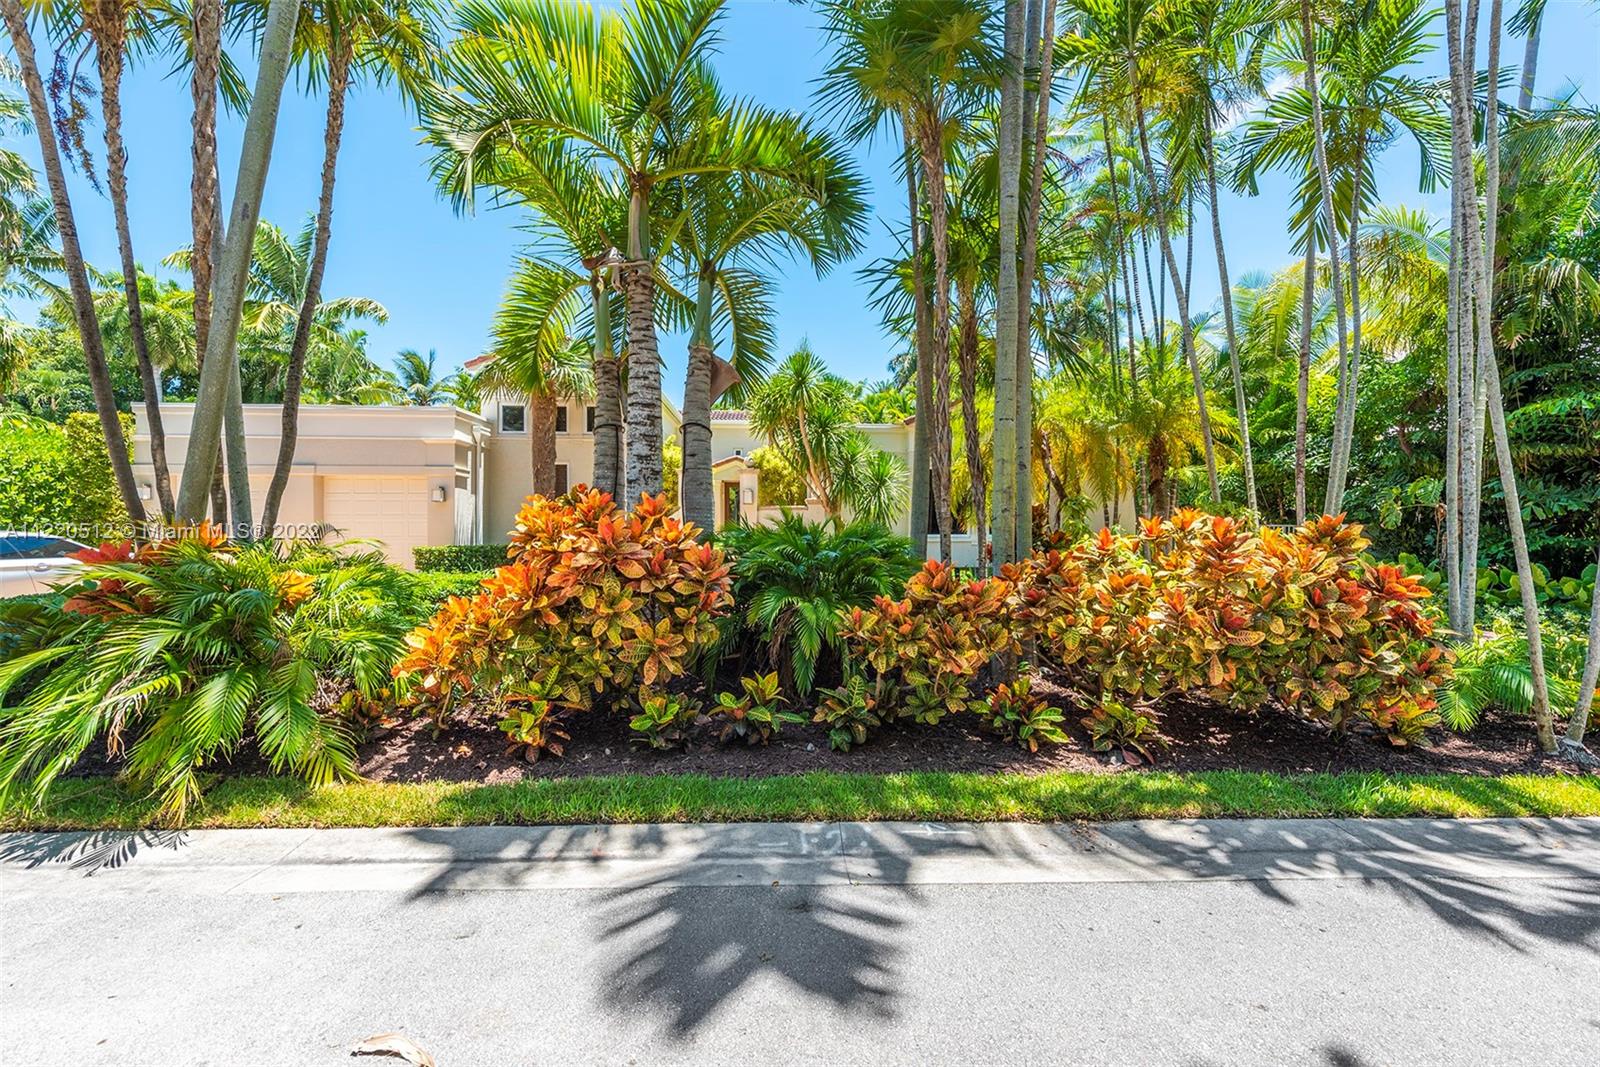 Beautiful single-family home located on Prestigious guard gated Sunset Island II. This one level home was renovated in 2021, has 5 bdrms, 5 baths. Situated on a 12,500 sq ft lot w/ over 4000 Sq. Ft of living space. This home features a newly renovated kitchen with top of the line appliances, quartz countertops, and it's indoor/outdoor flow is perfect for entertaining. Smart home technology. Exterior features include a large driveway, lush backyard with a large heated pool & mature trees with lots of privacy. First time on the market in over 30+ years.